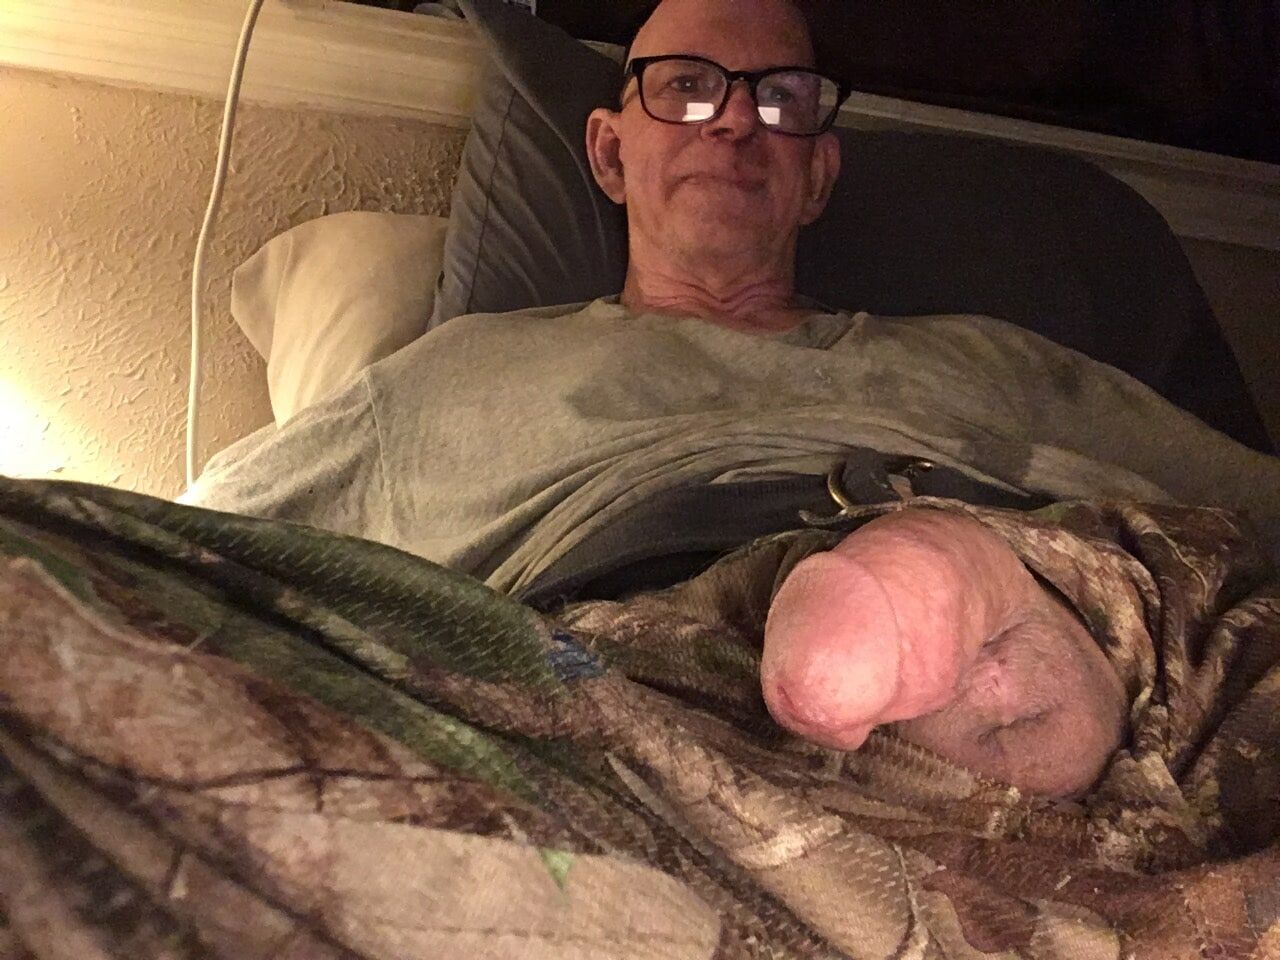 My cock hanging out 